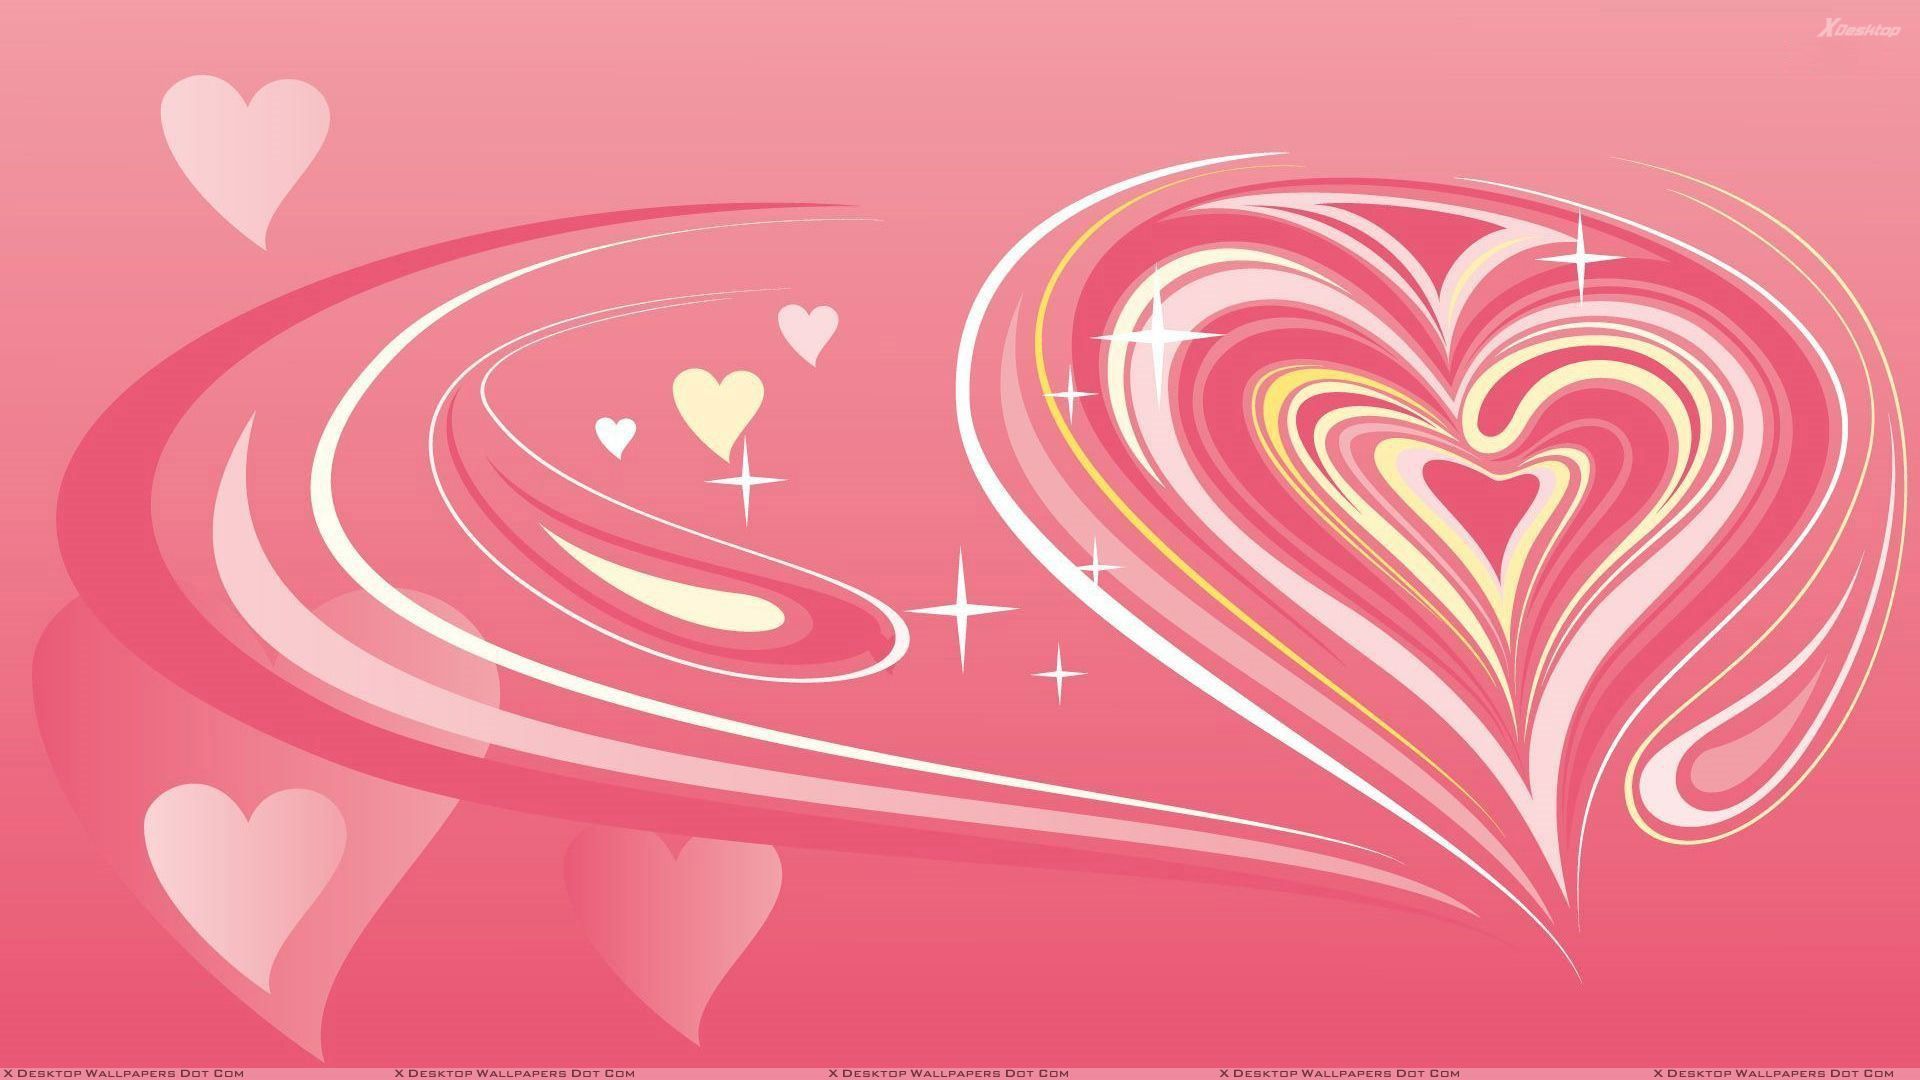 Artistic Heart And Pink Background Wallpaper. Pink wallpaper background, Love pink wallpaper, Pink wallpaper